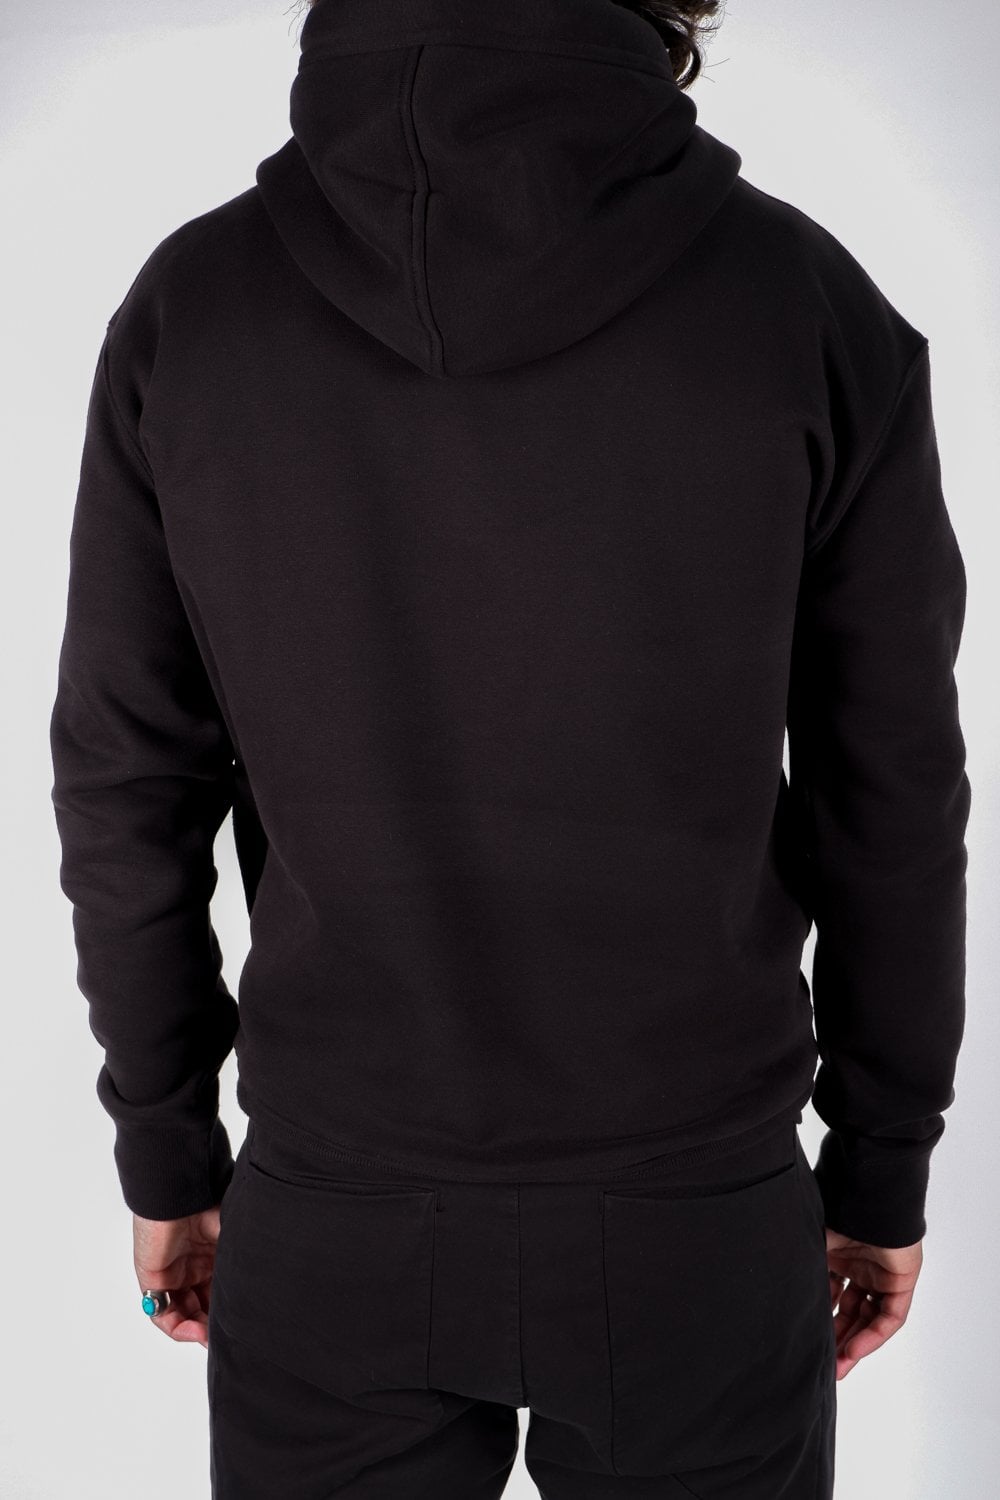 Buy the ABE New Jordan Hoodie in Black at Intro. Spend £50 for free UK delivery. Official stockists. We ship worldwide.